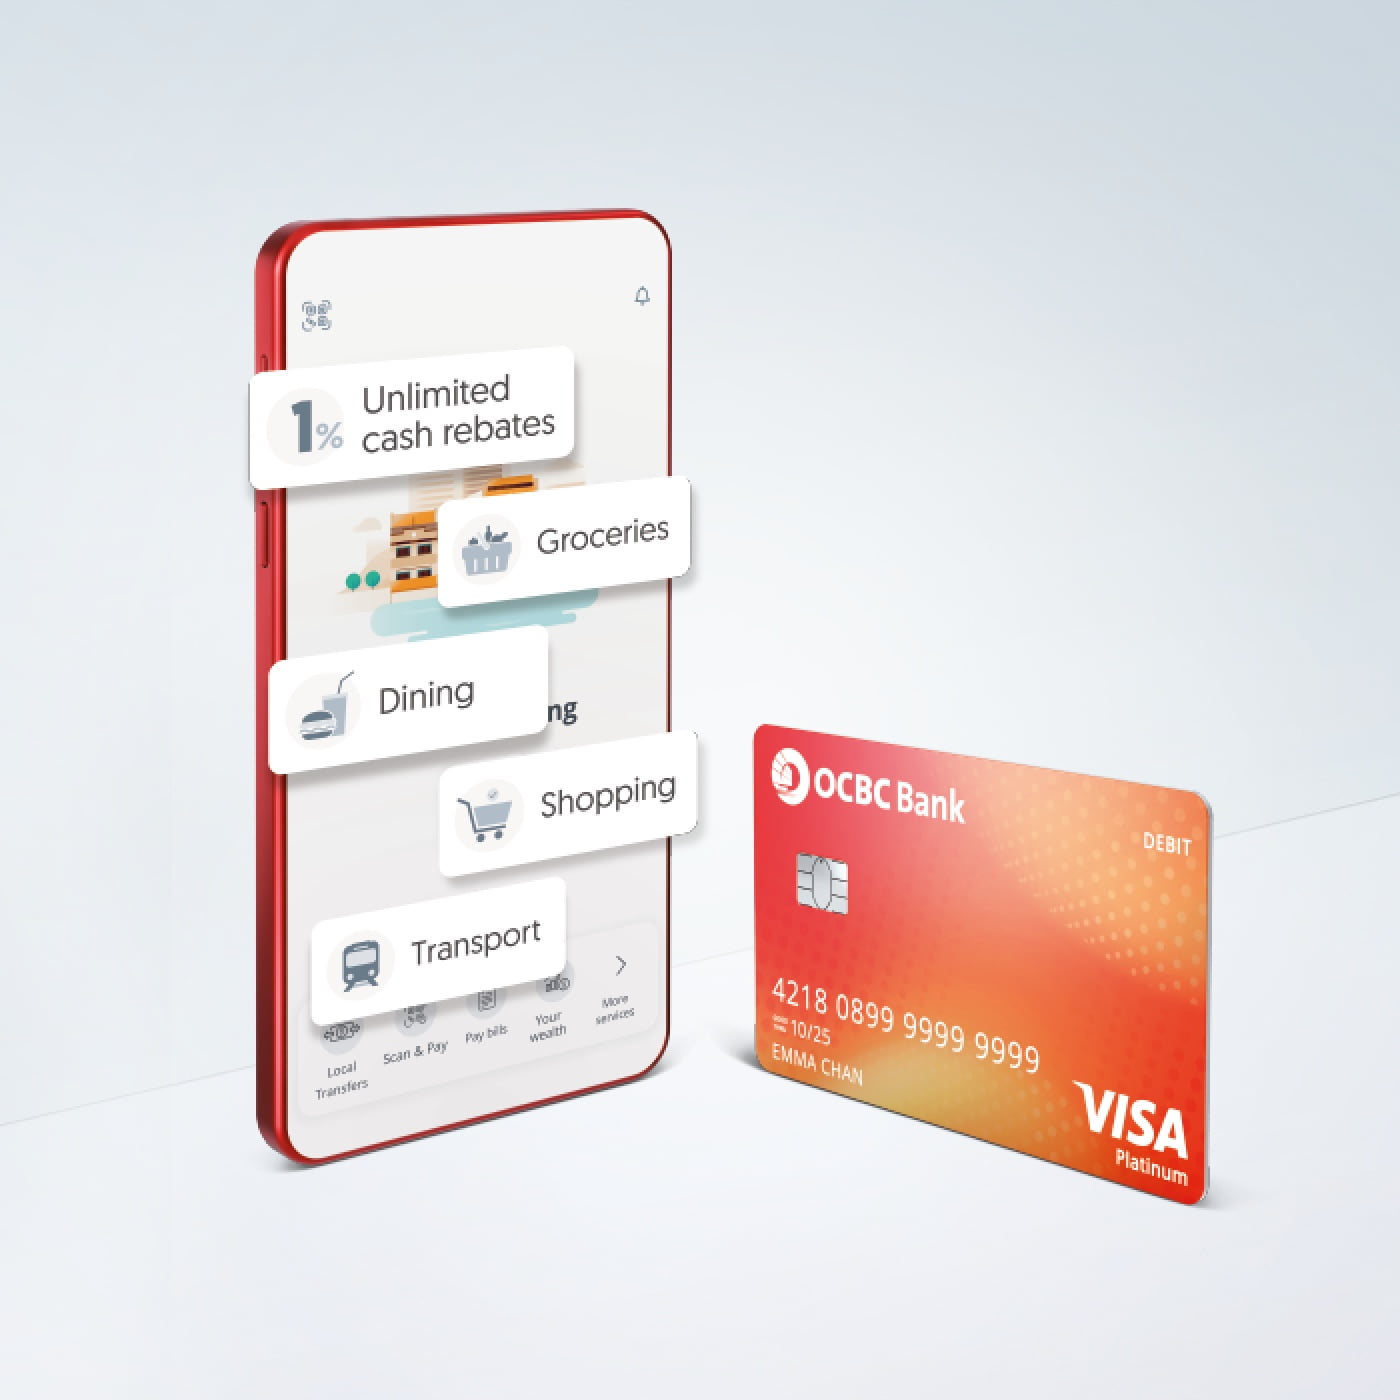 New OCBC Debit Card holders can earn a cash rebate of up to S$50!